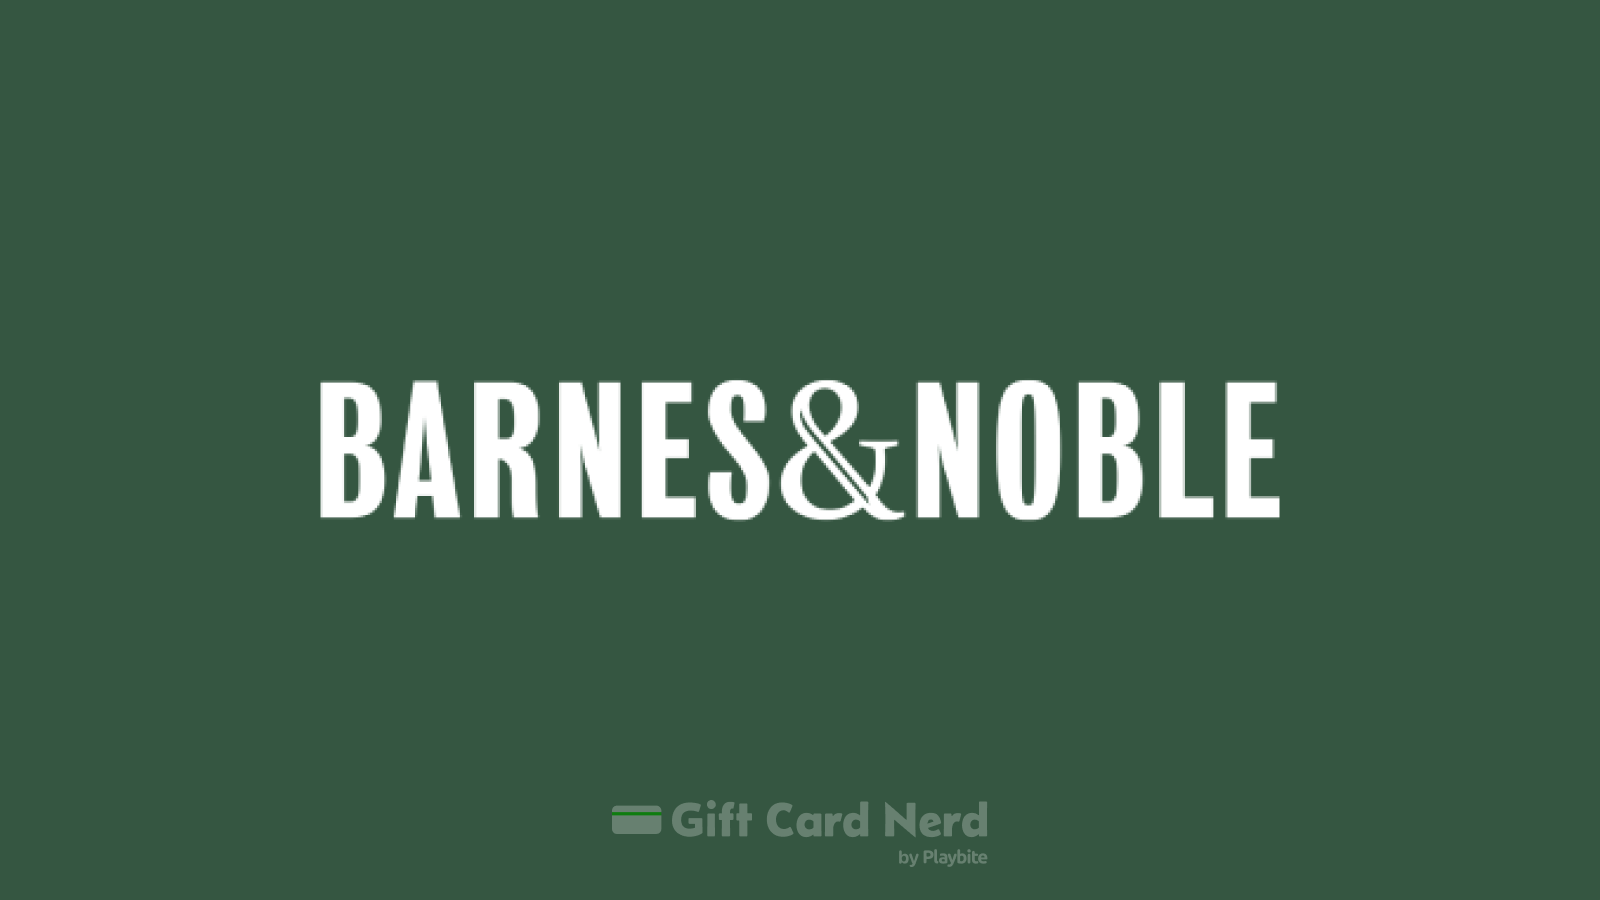 Where to Buy Barnes and Noble Gift Cards: Walmart or Other Options